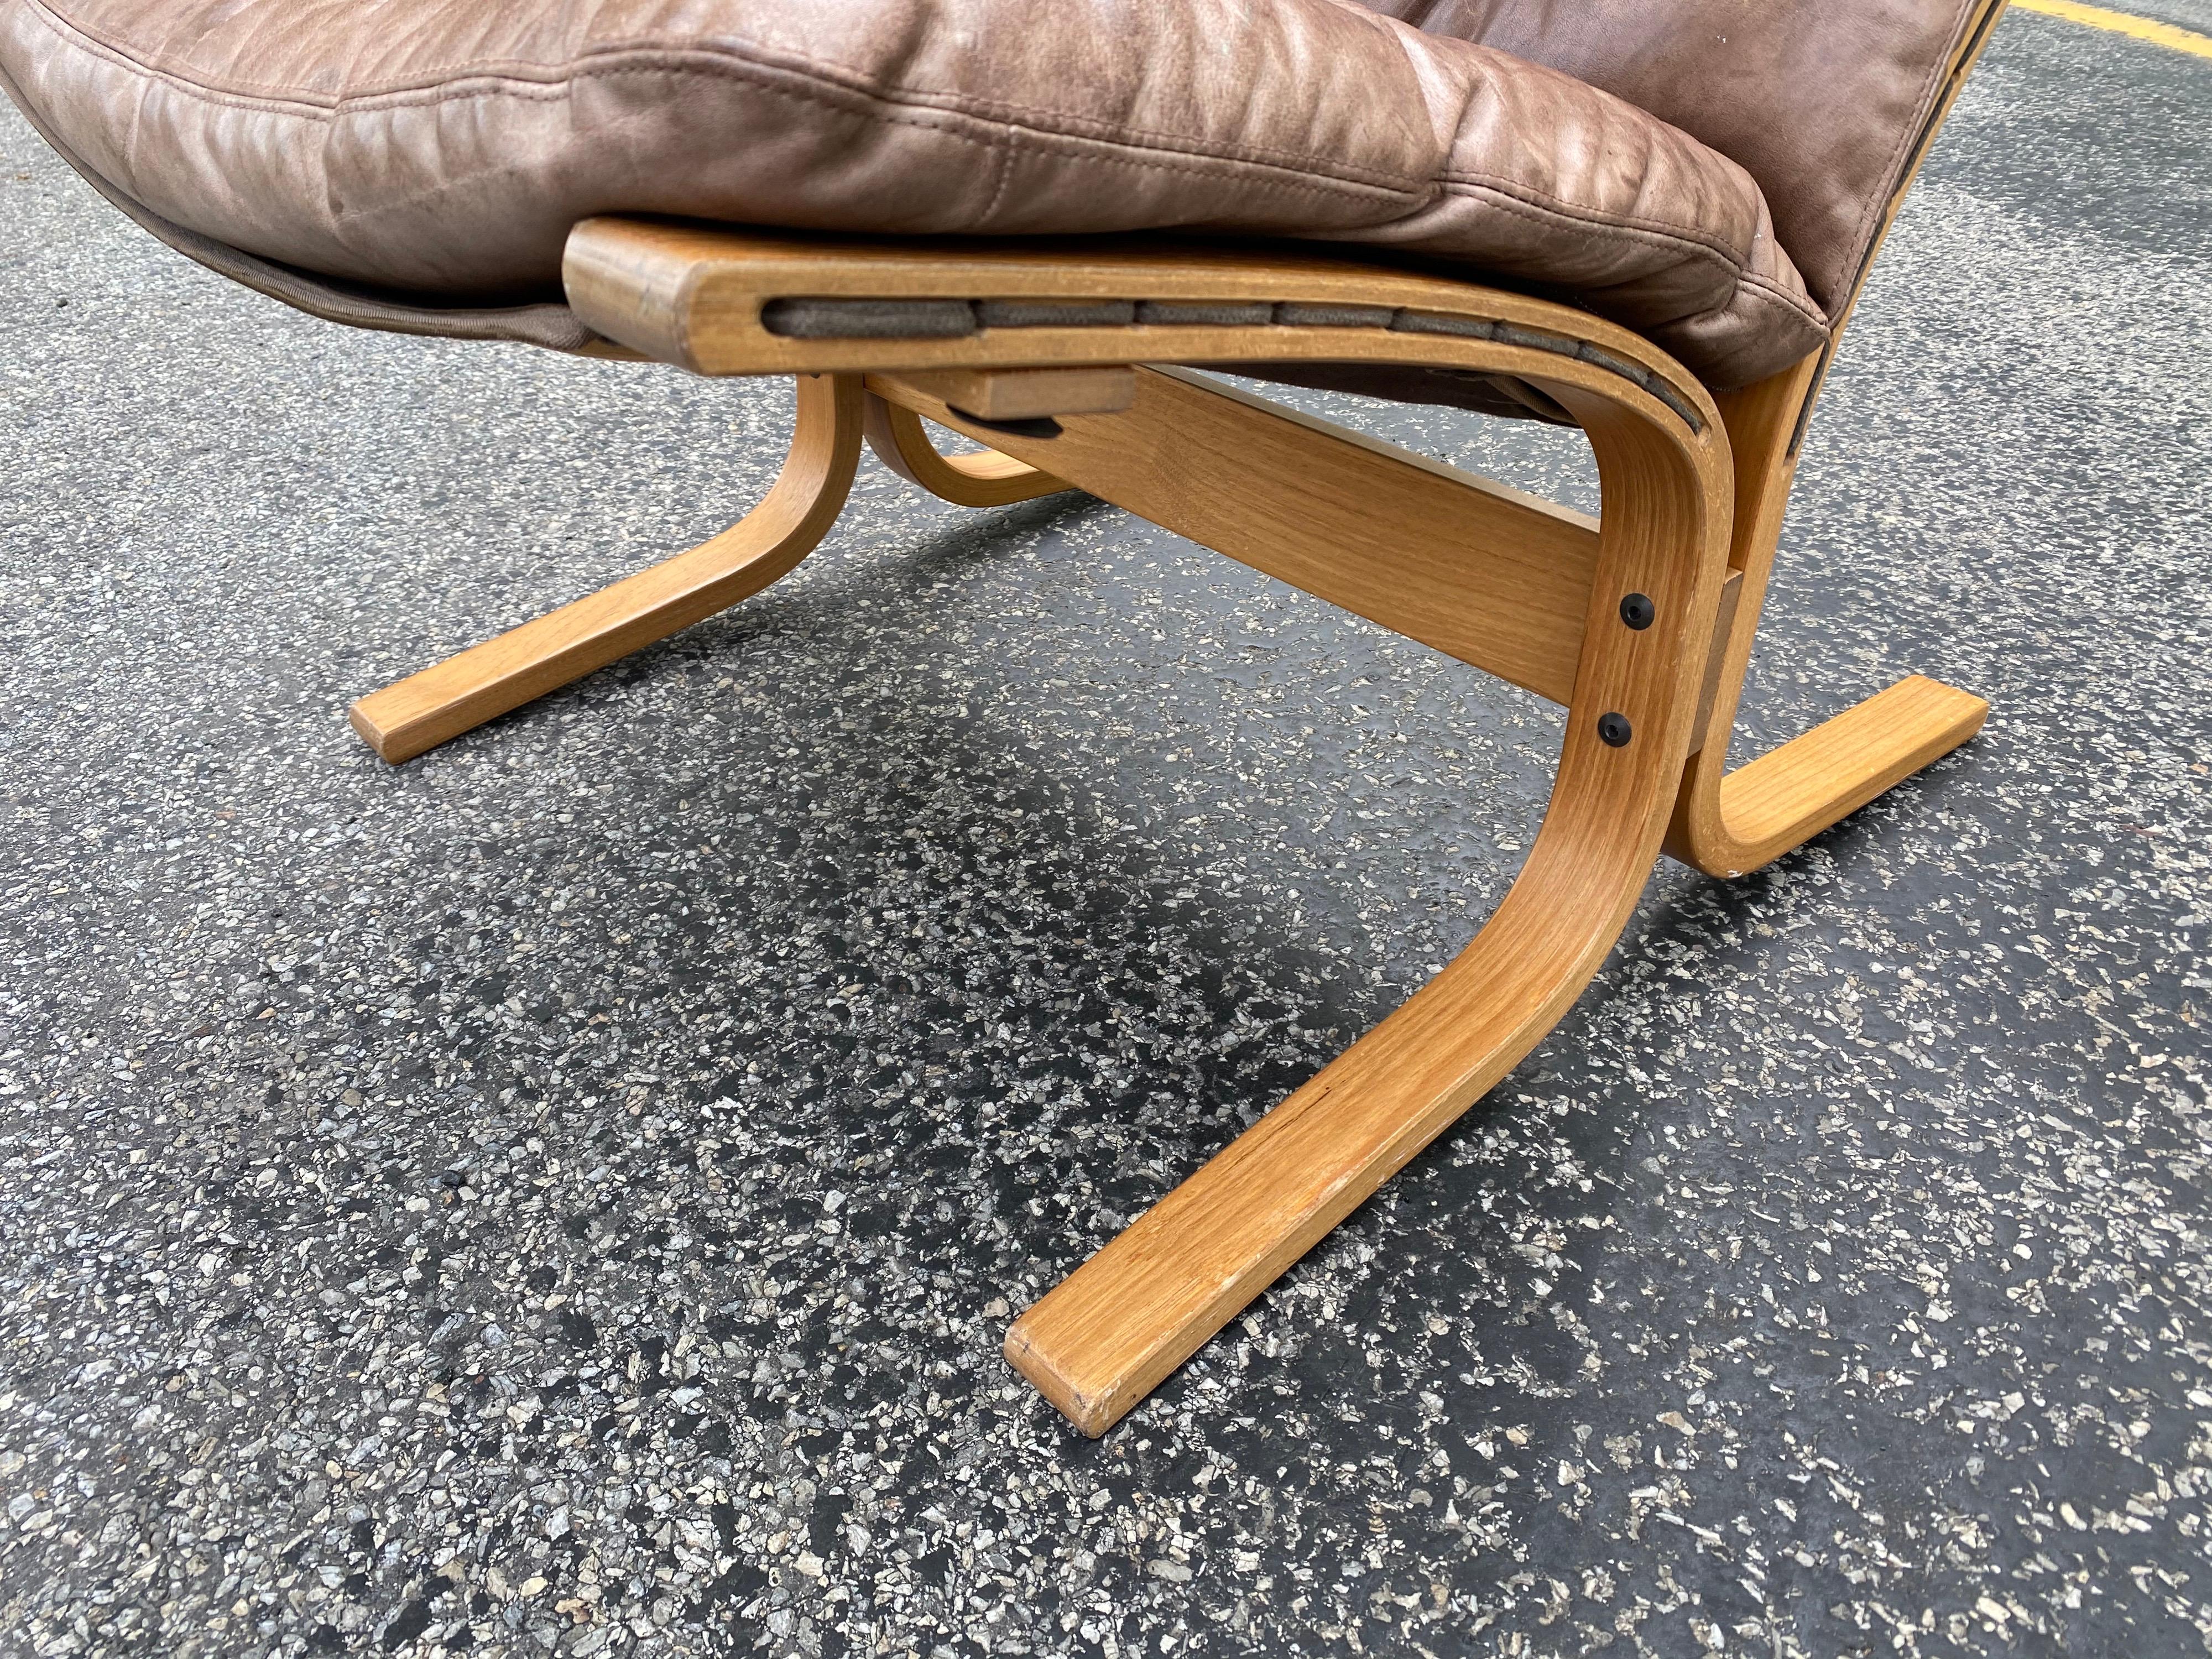 Westnofa Siesta lounge chair in brown leather designed by Ingmar Relling and produced in Norway. Nice condition, canvas is solid and clean. Leather shows slight overall fading, but is in good shape with no rips or tears.